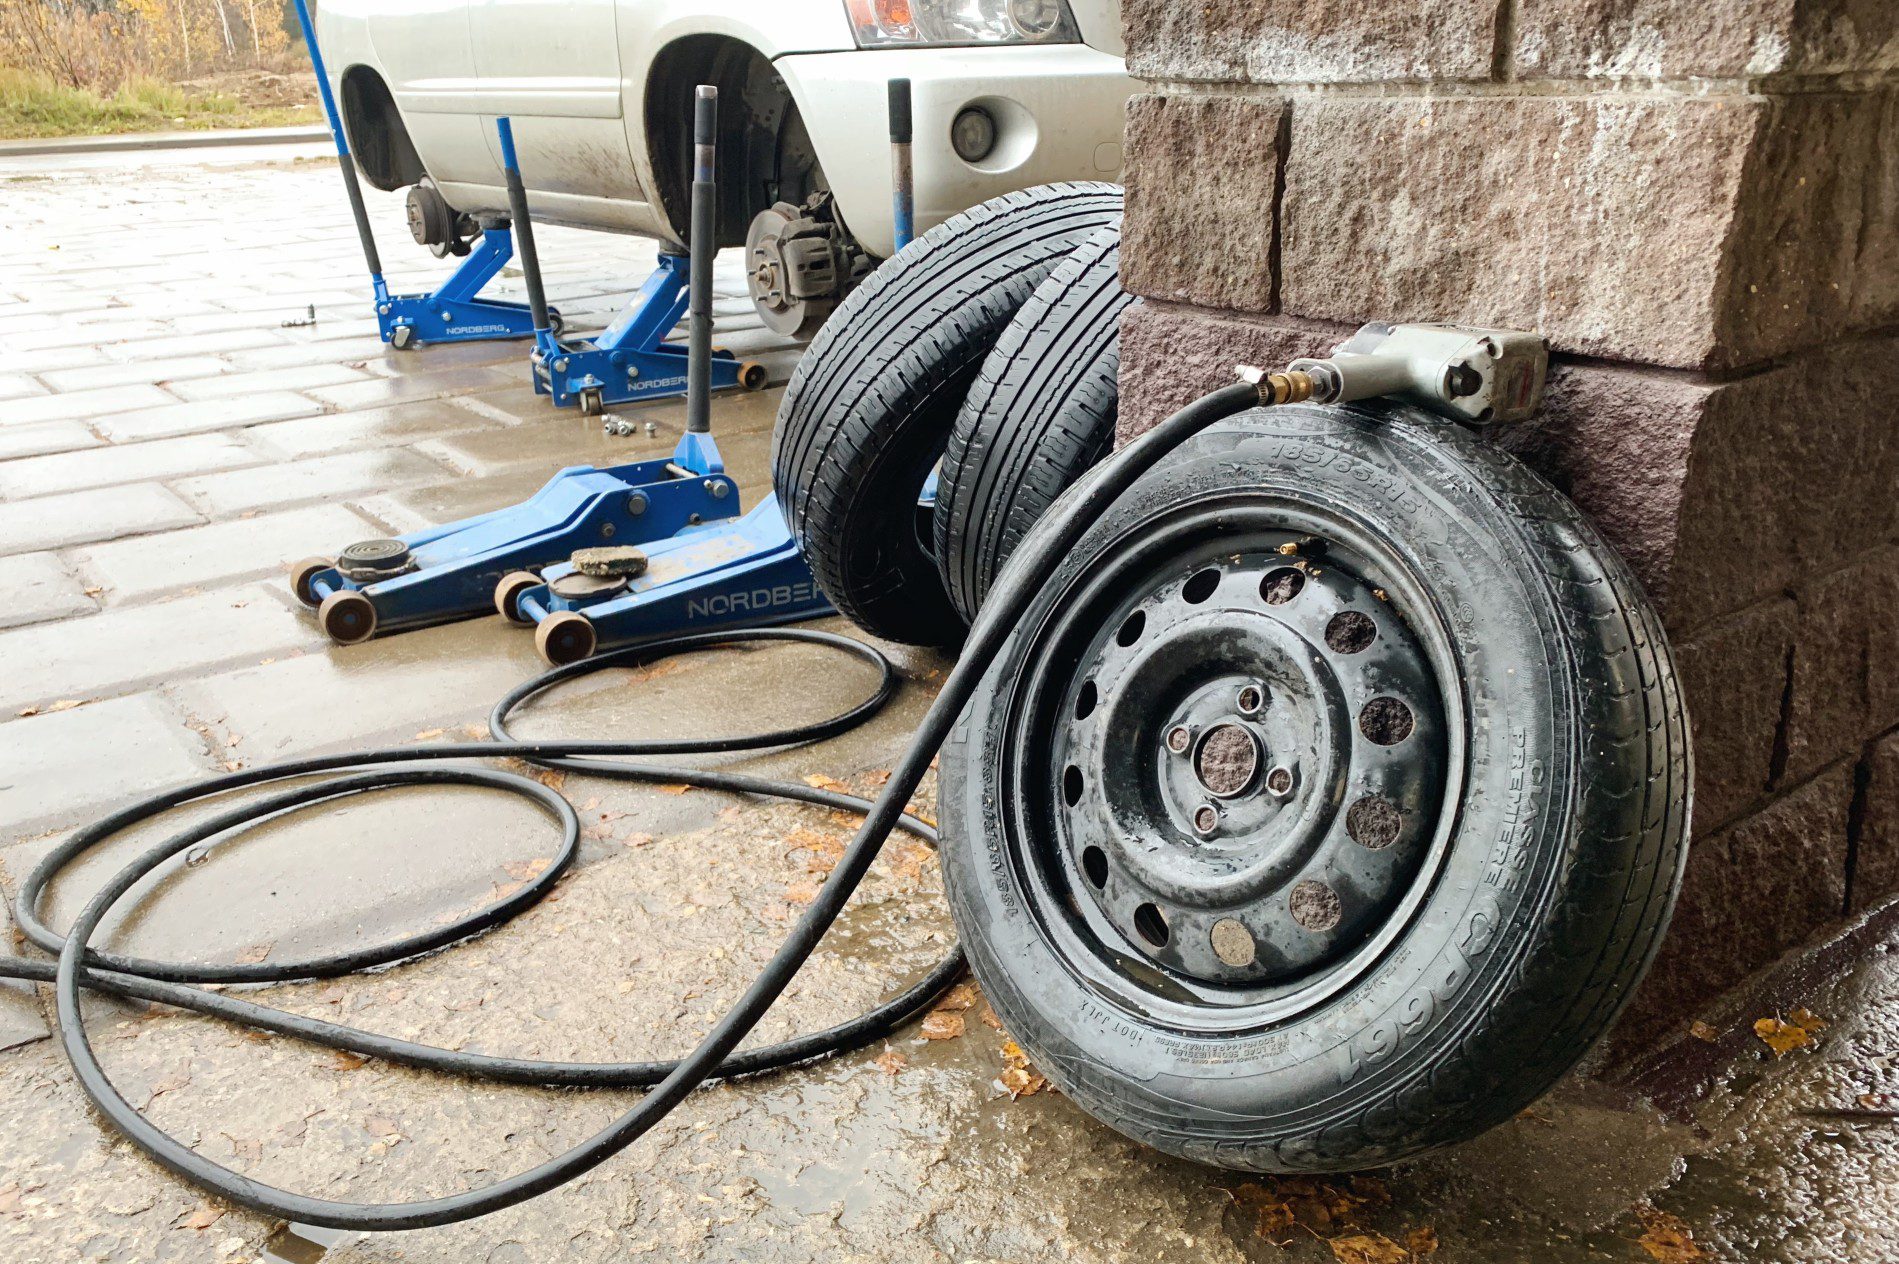 RV Tire Blowouts: 7 Tips to Prevent an Awful Accident